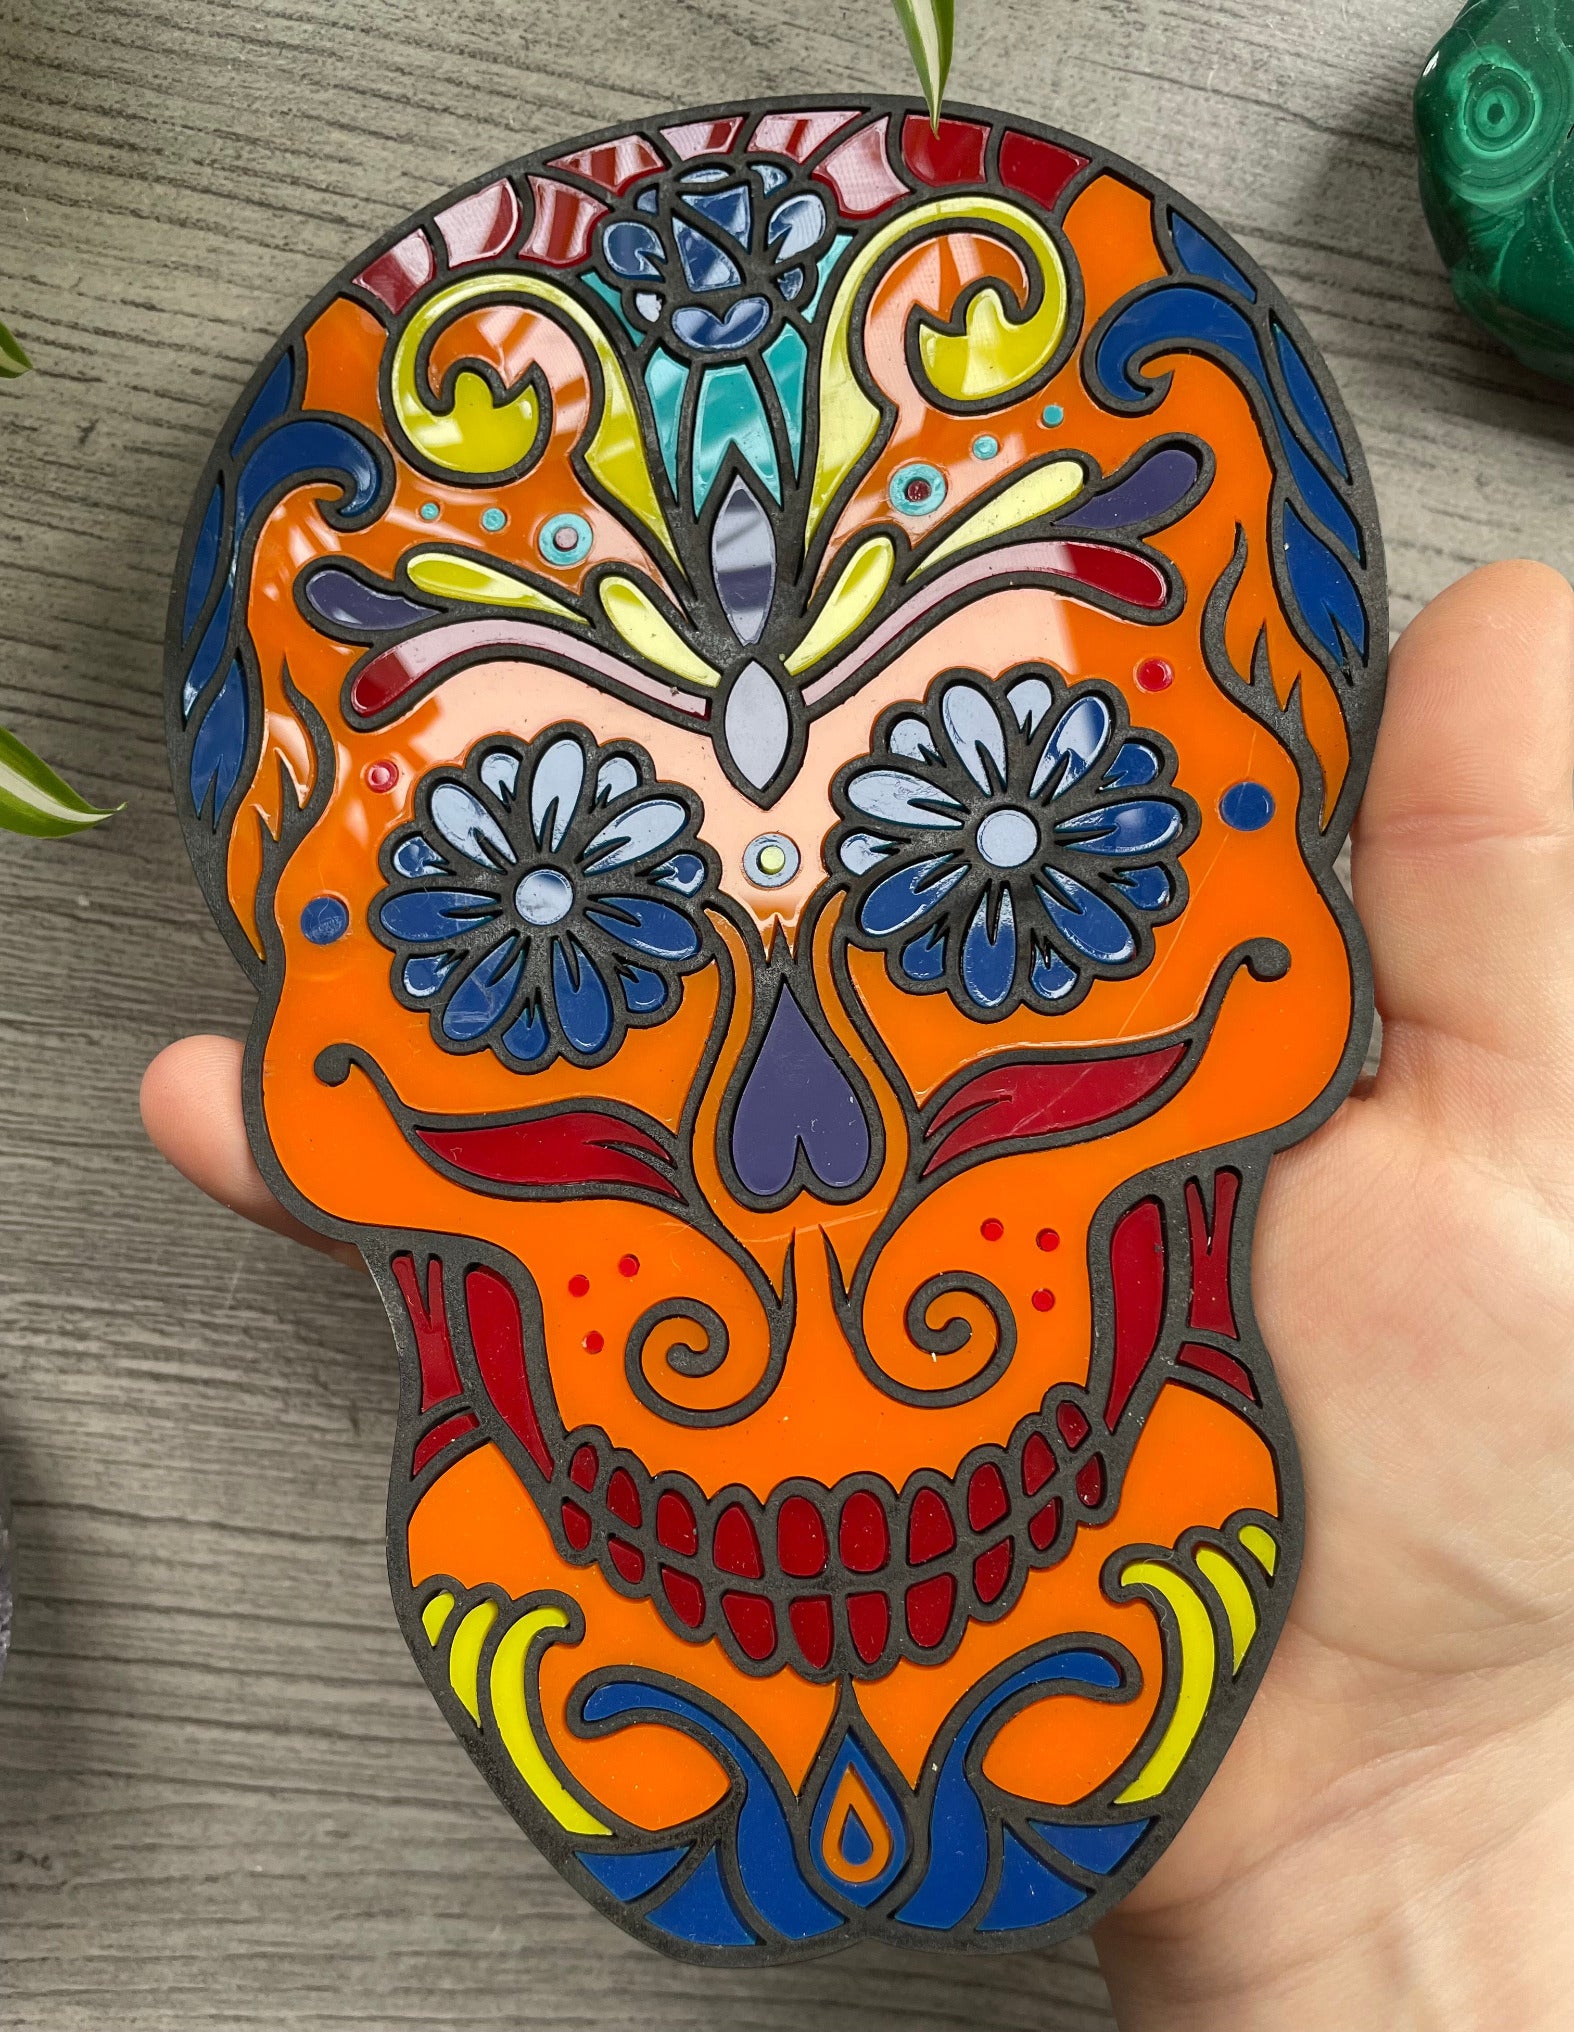 Pictured is a faux stained glass sugar skull made out of wood and acrylic.